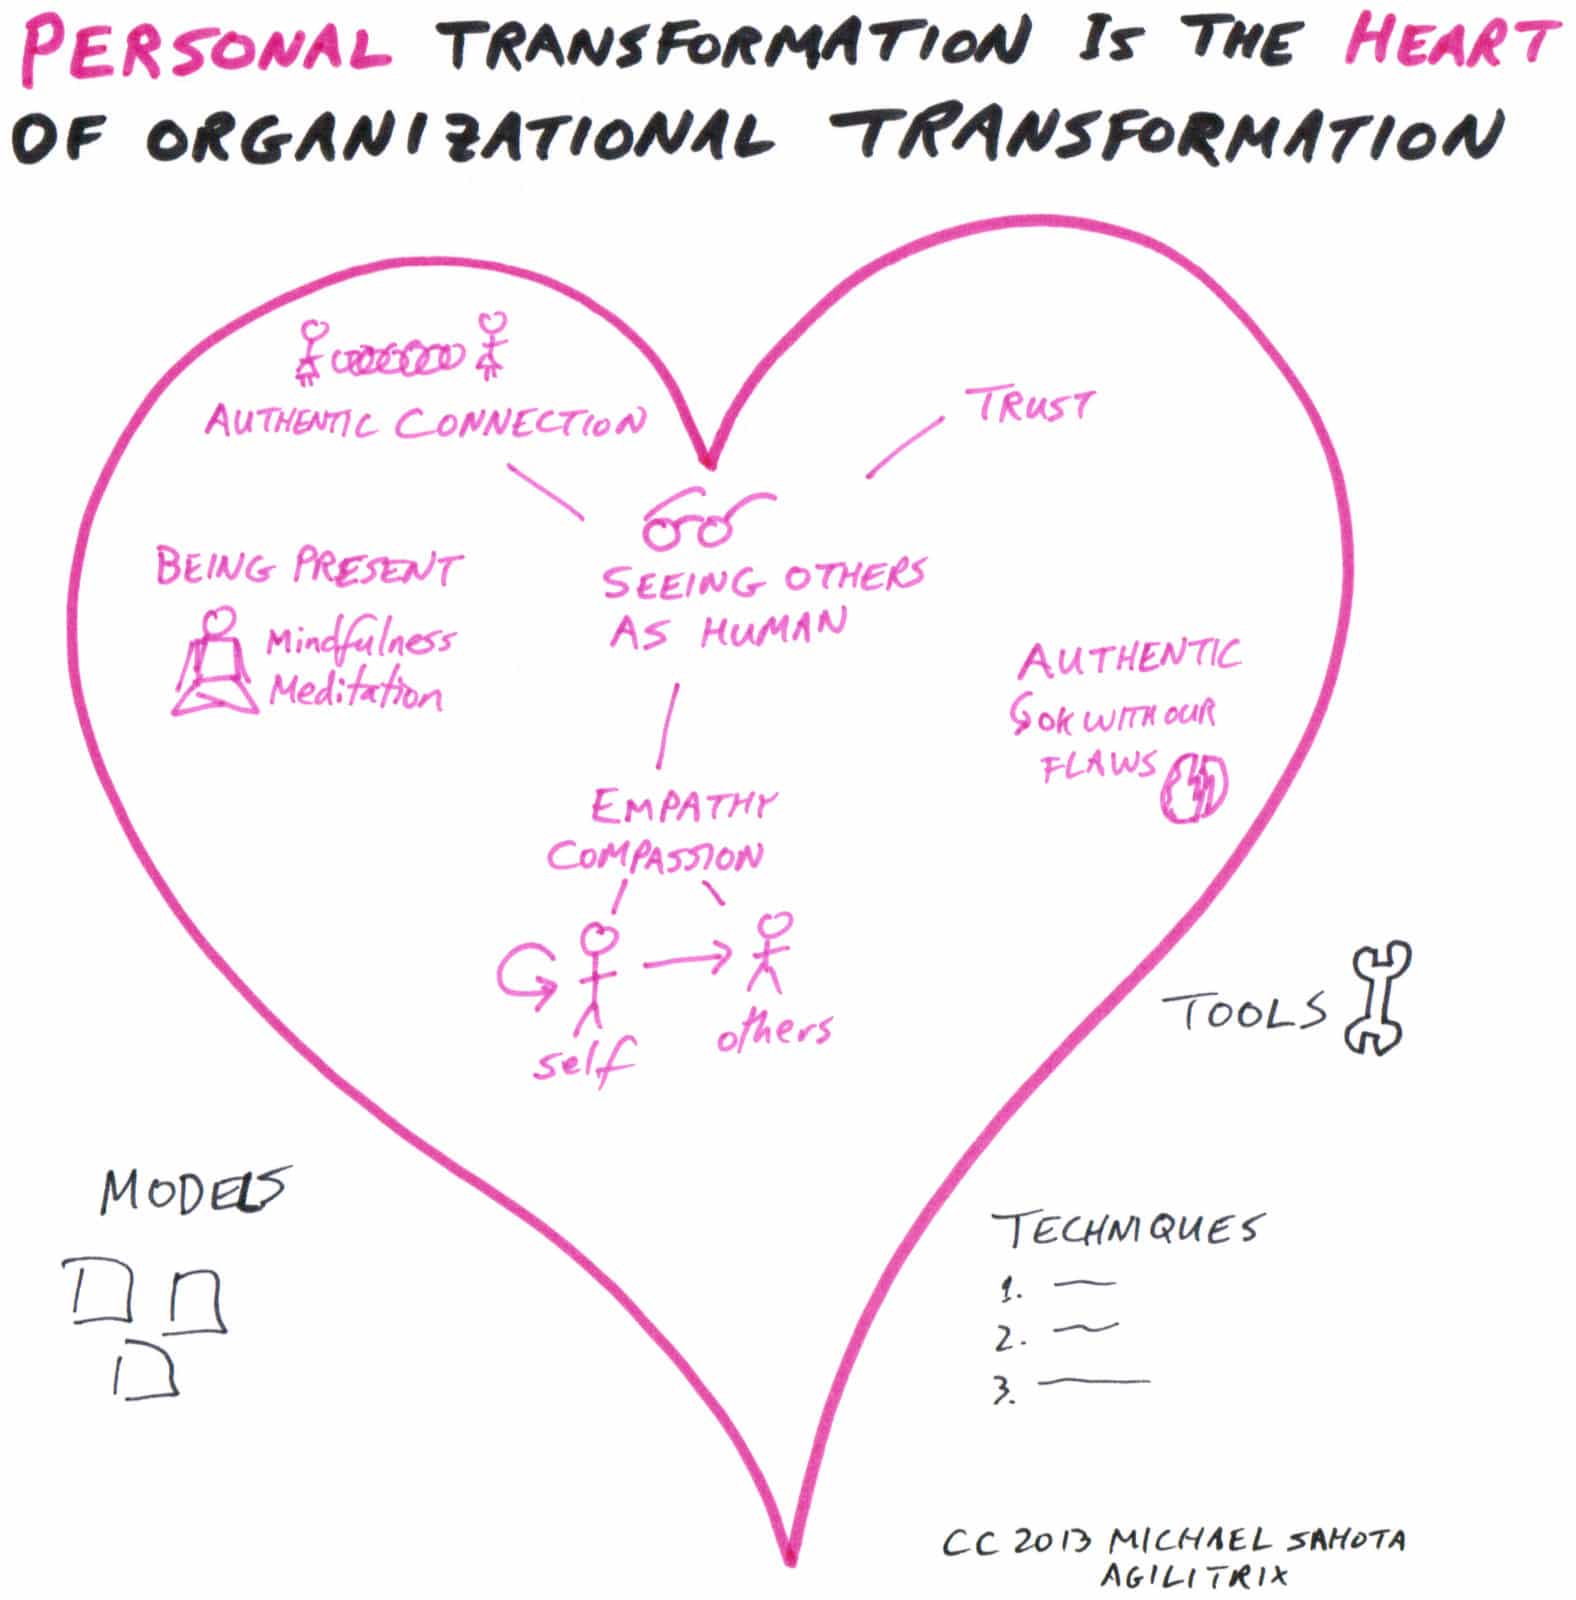 Personal Transformation Heart of Org Trans